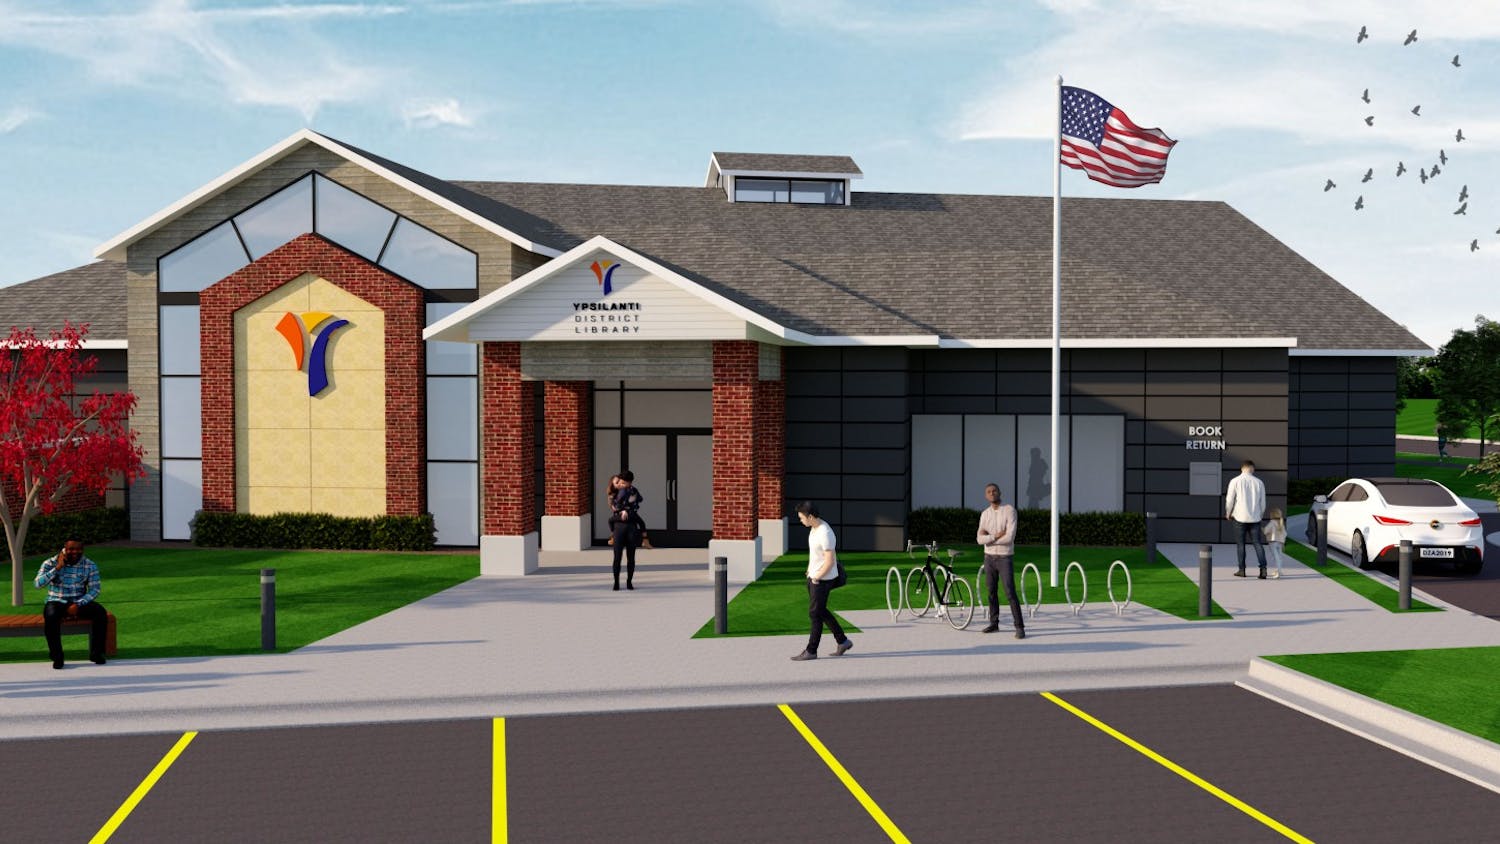 Rendering of New Ypsilanti District Library